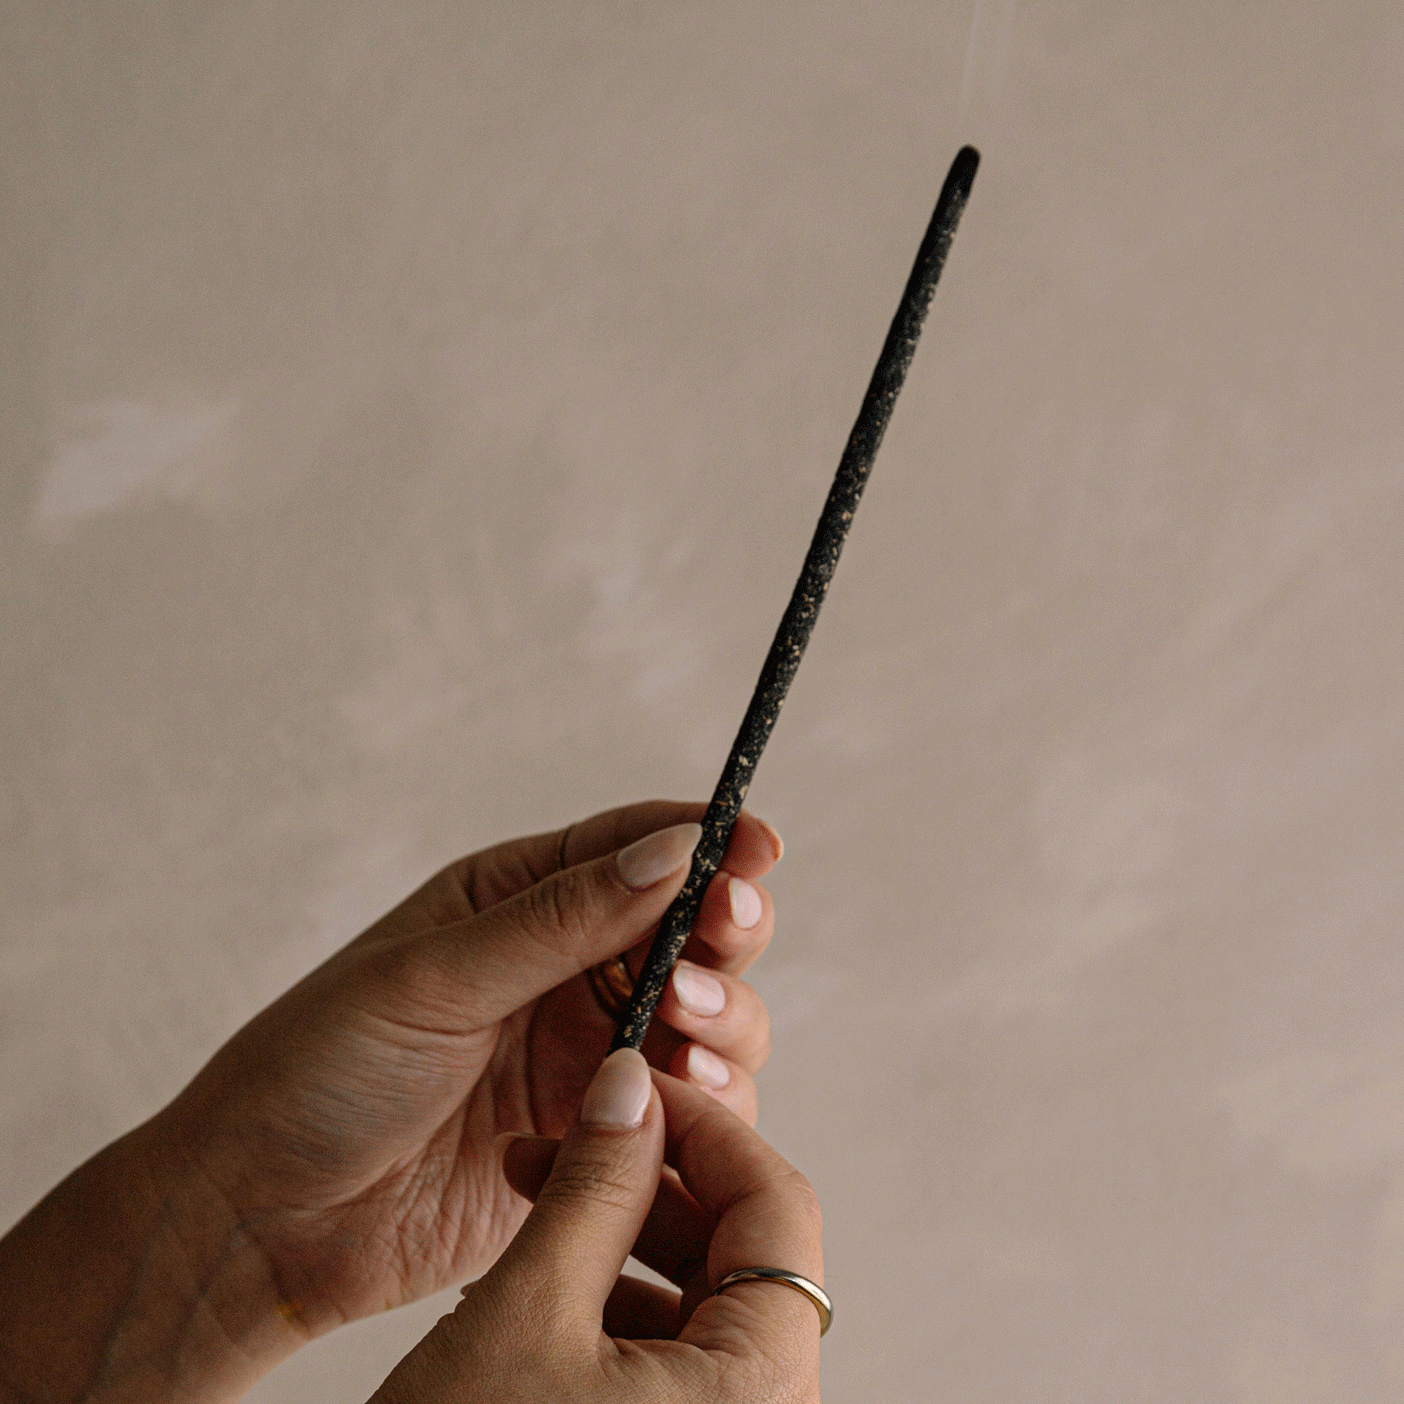 A gif showing the process of burning black copal incense stick.